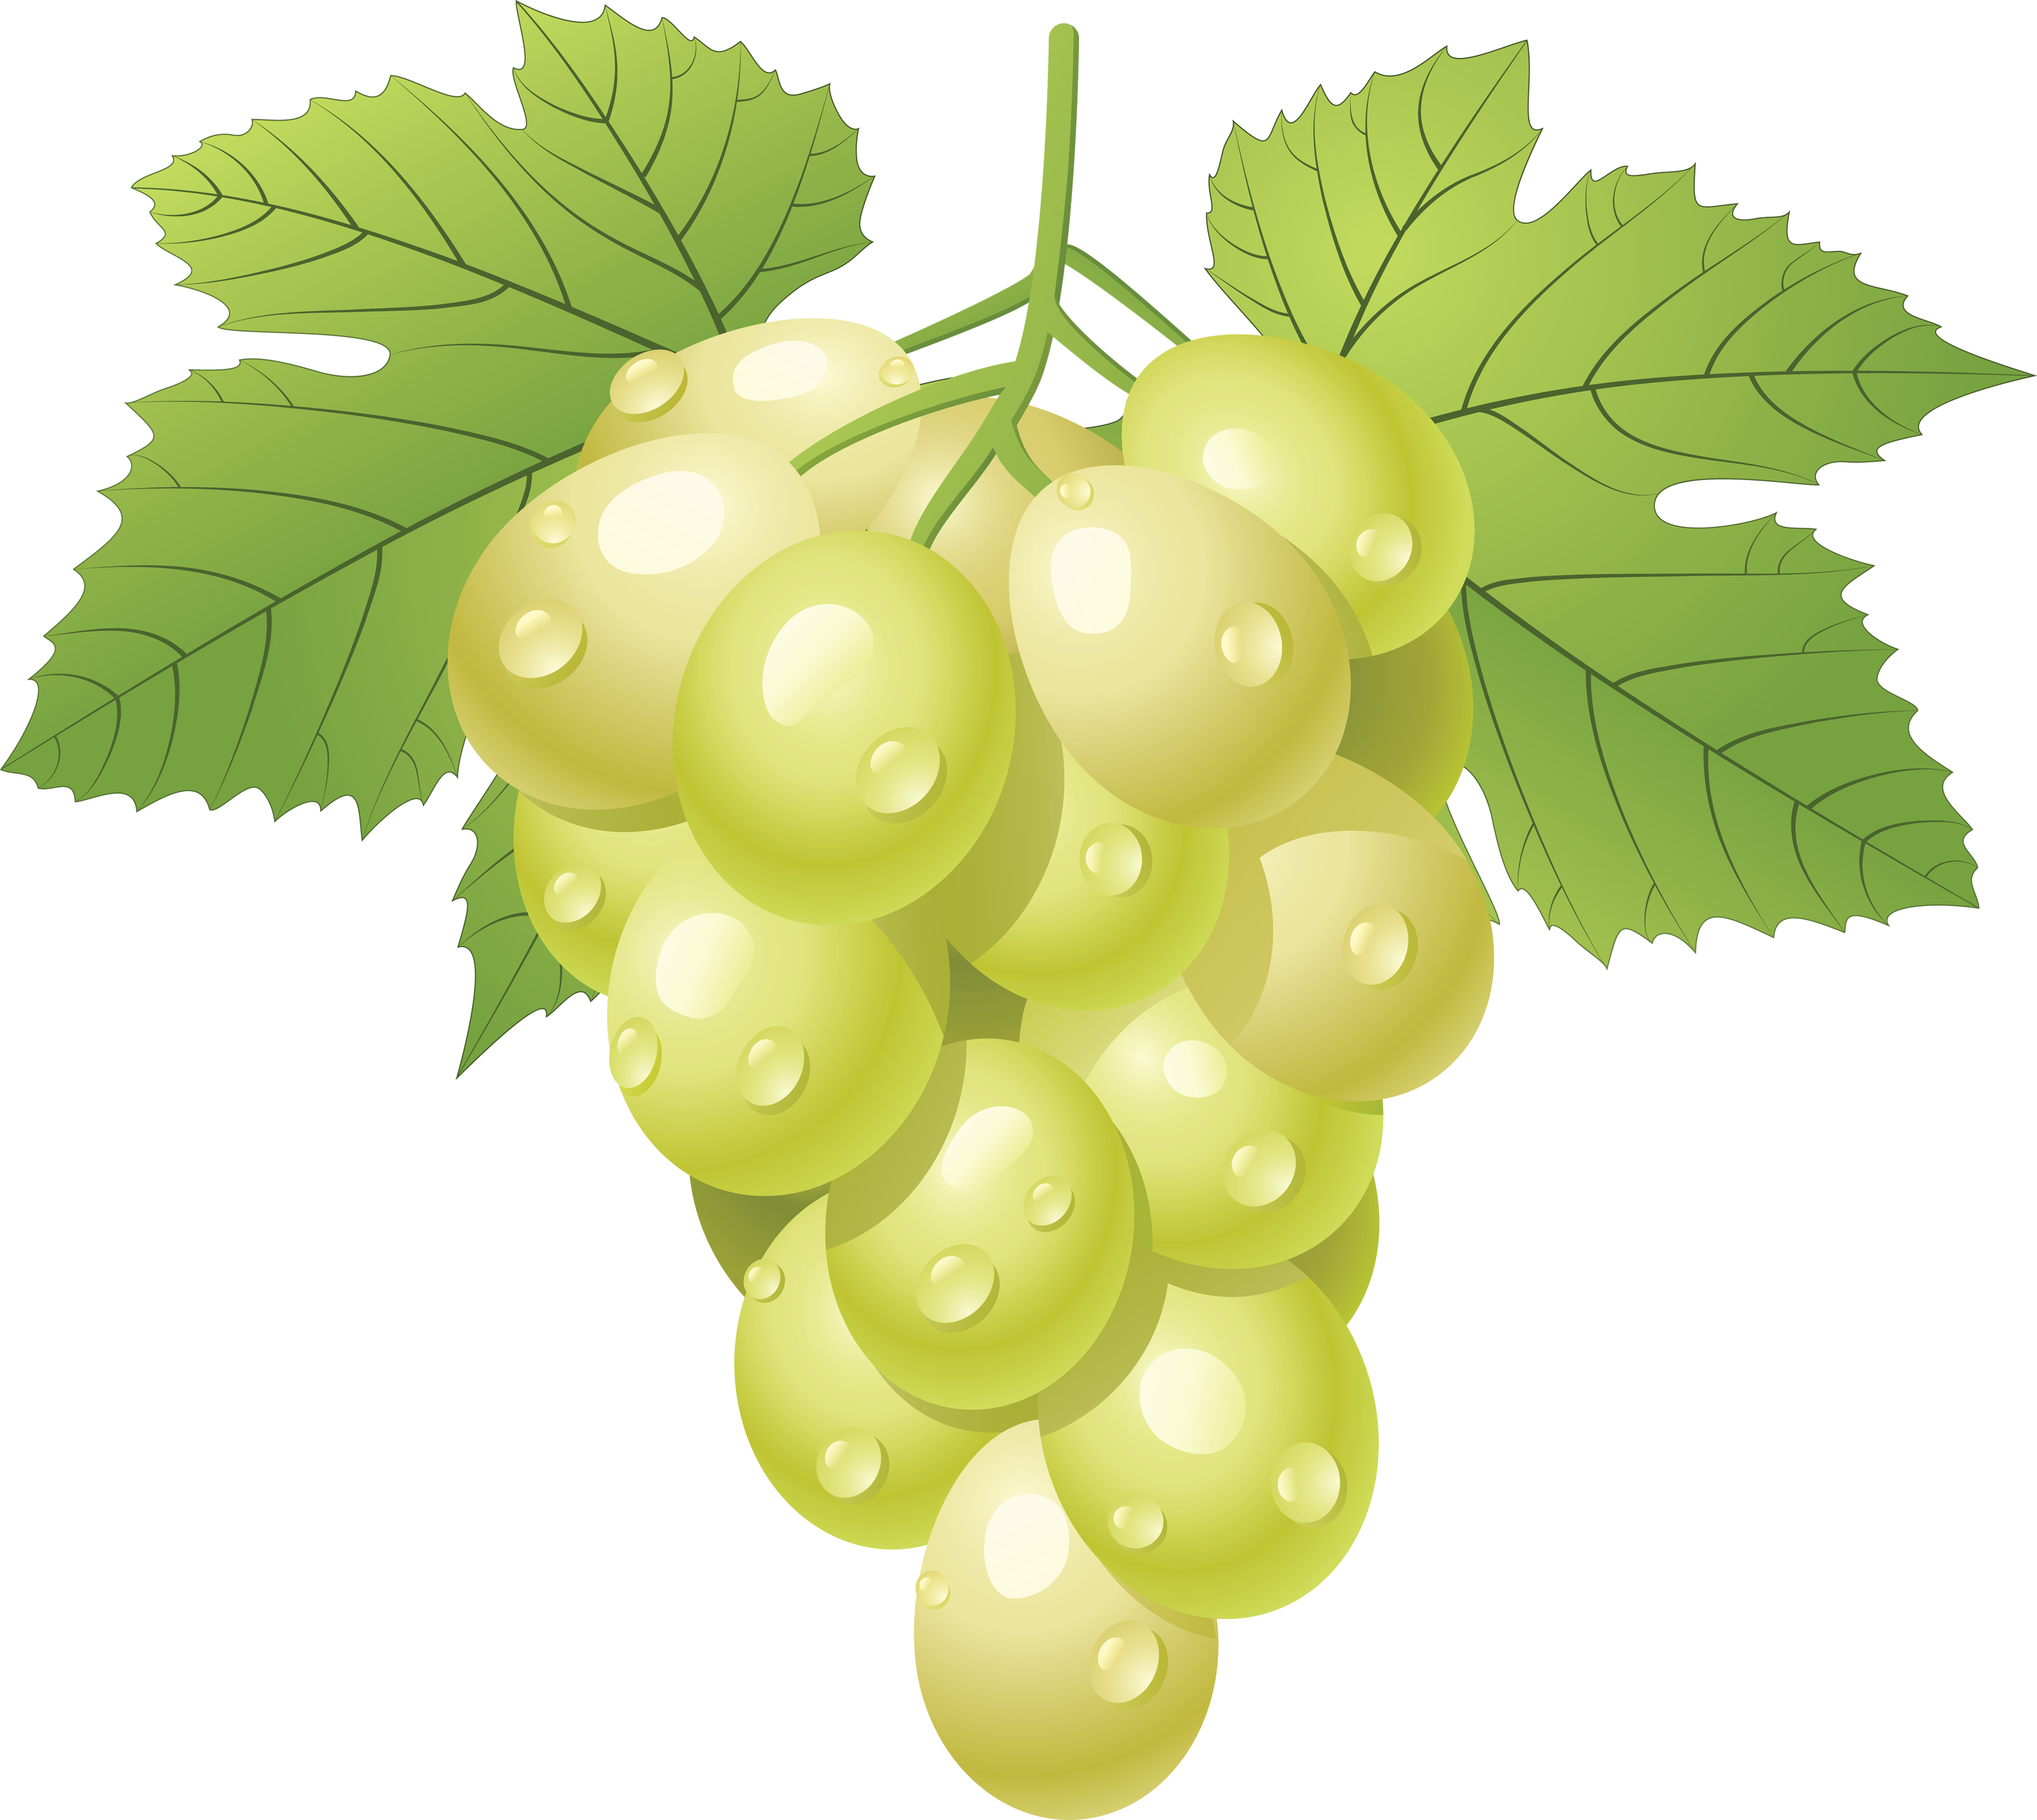 Grapes grape image free picture download clipart 